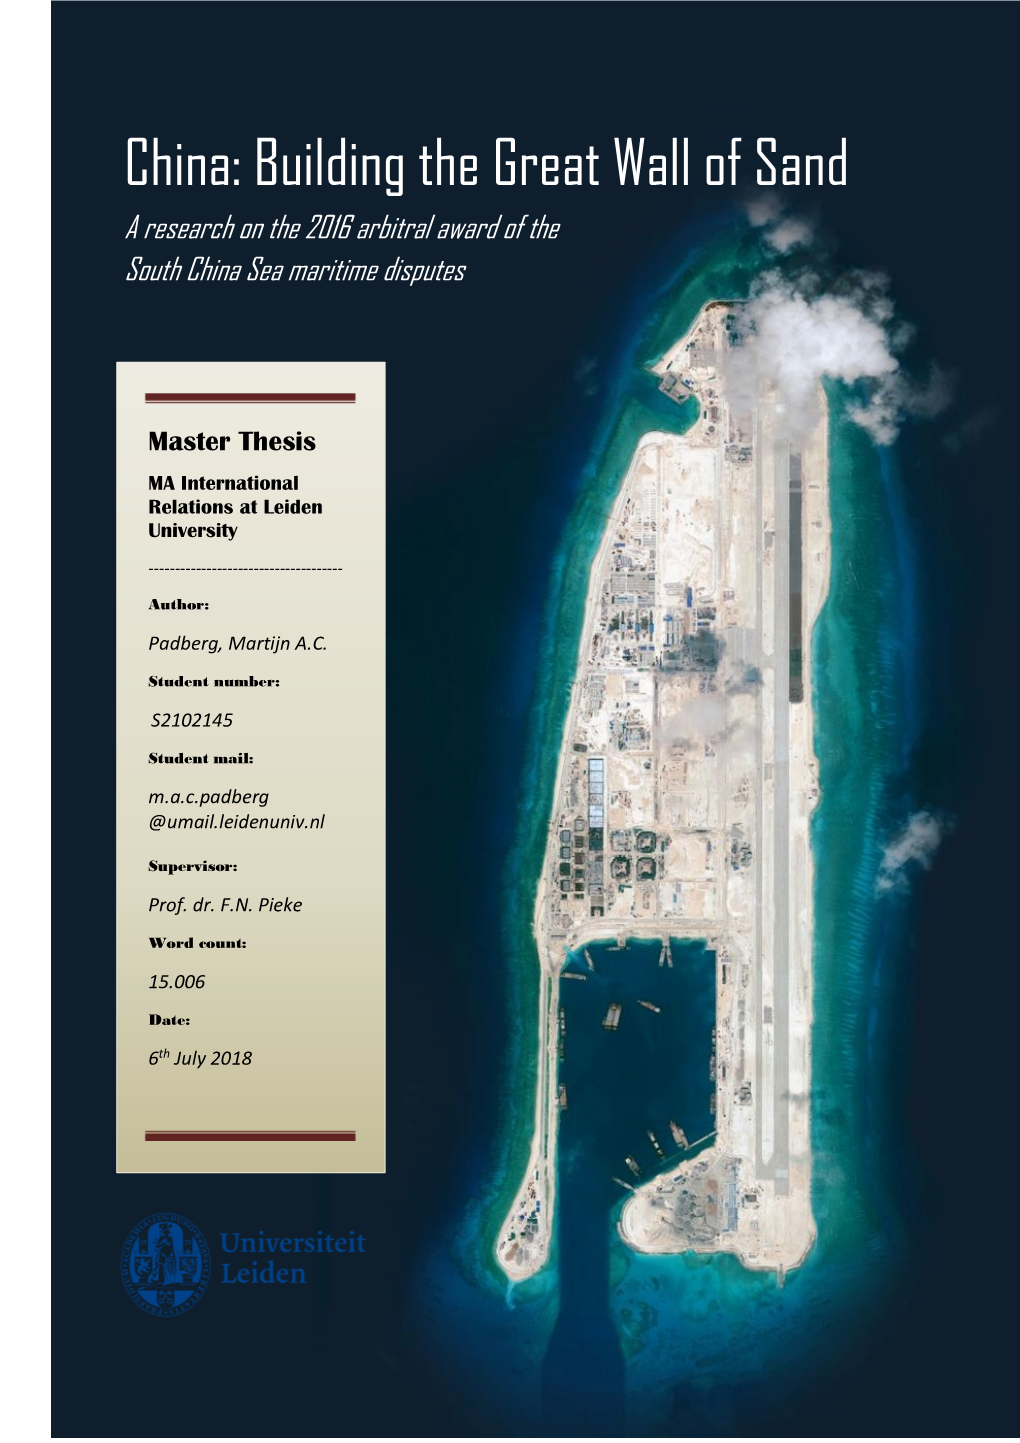 Building the Great Wall of Sand a Research on the 2016 Arbitral Award of the South China Sea Maritime Disputes